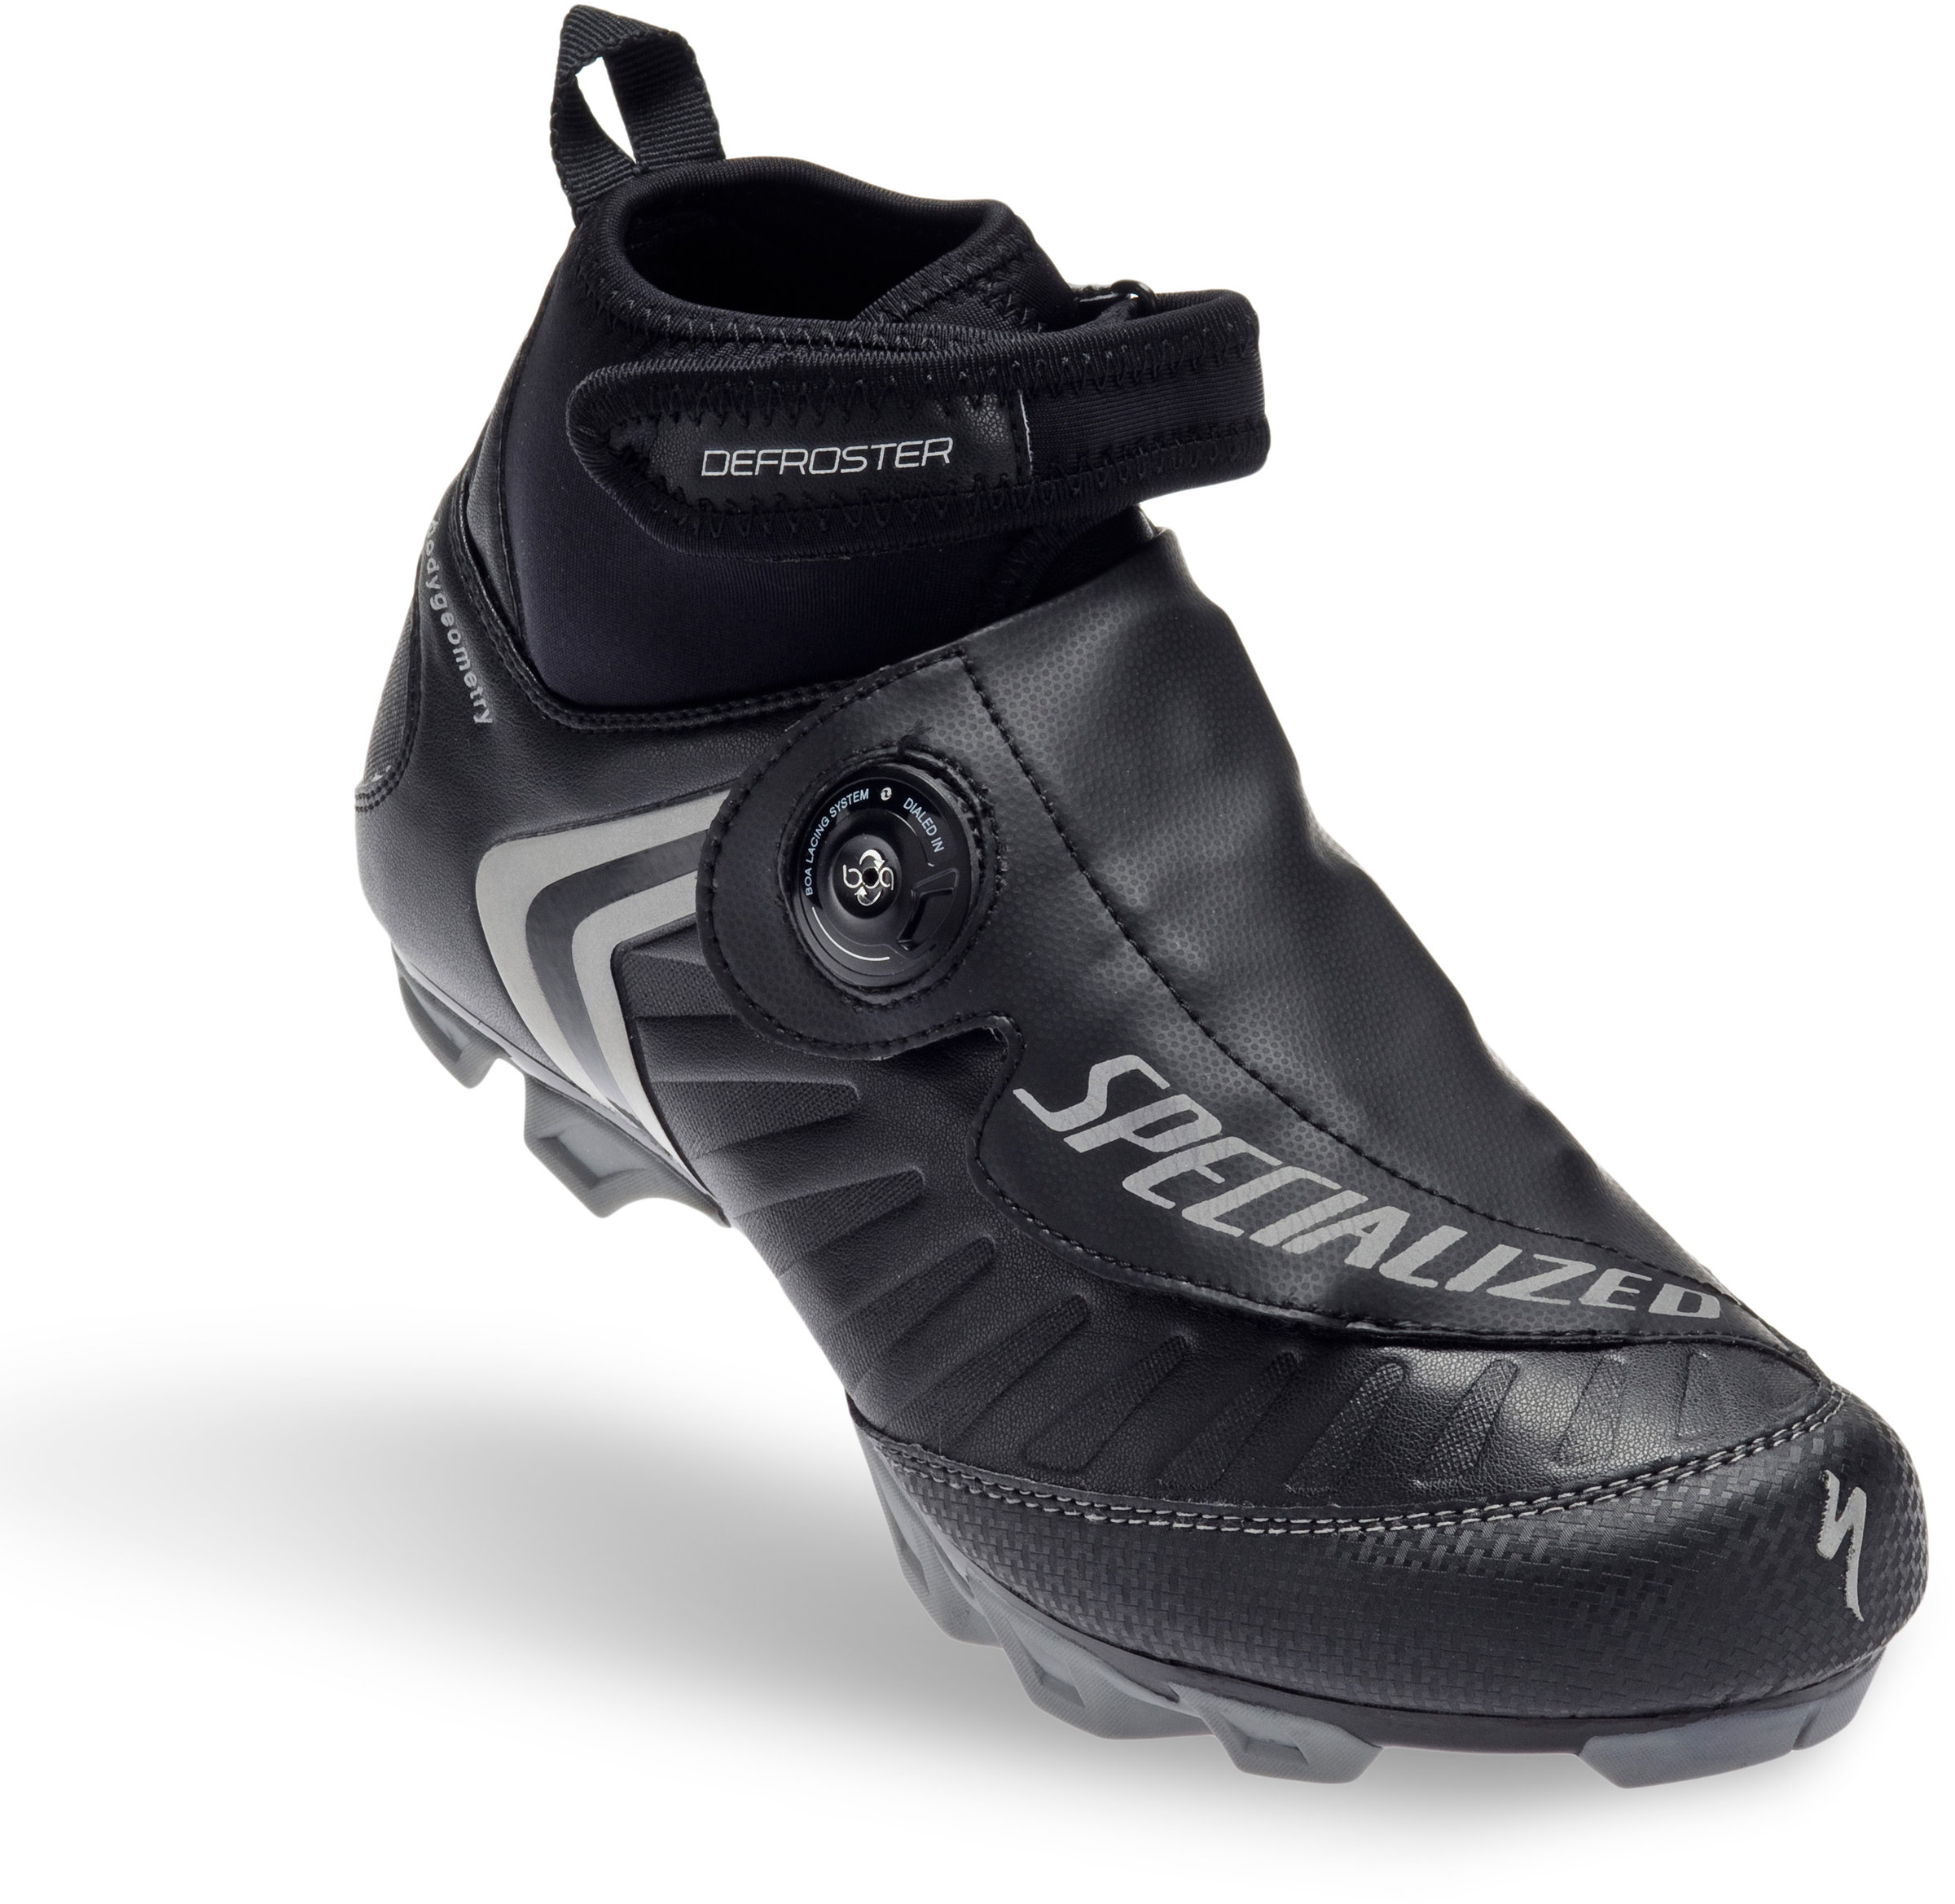 specialized defroster shoes